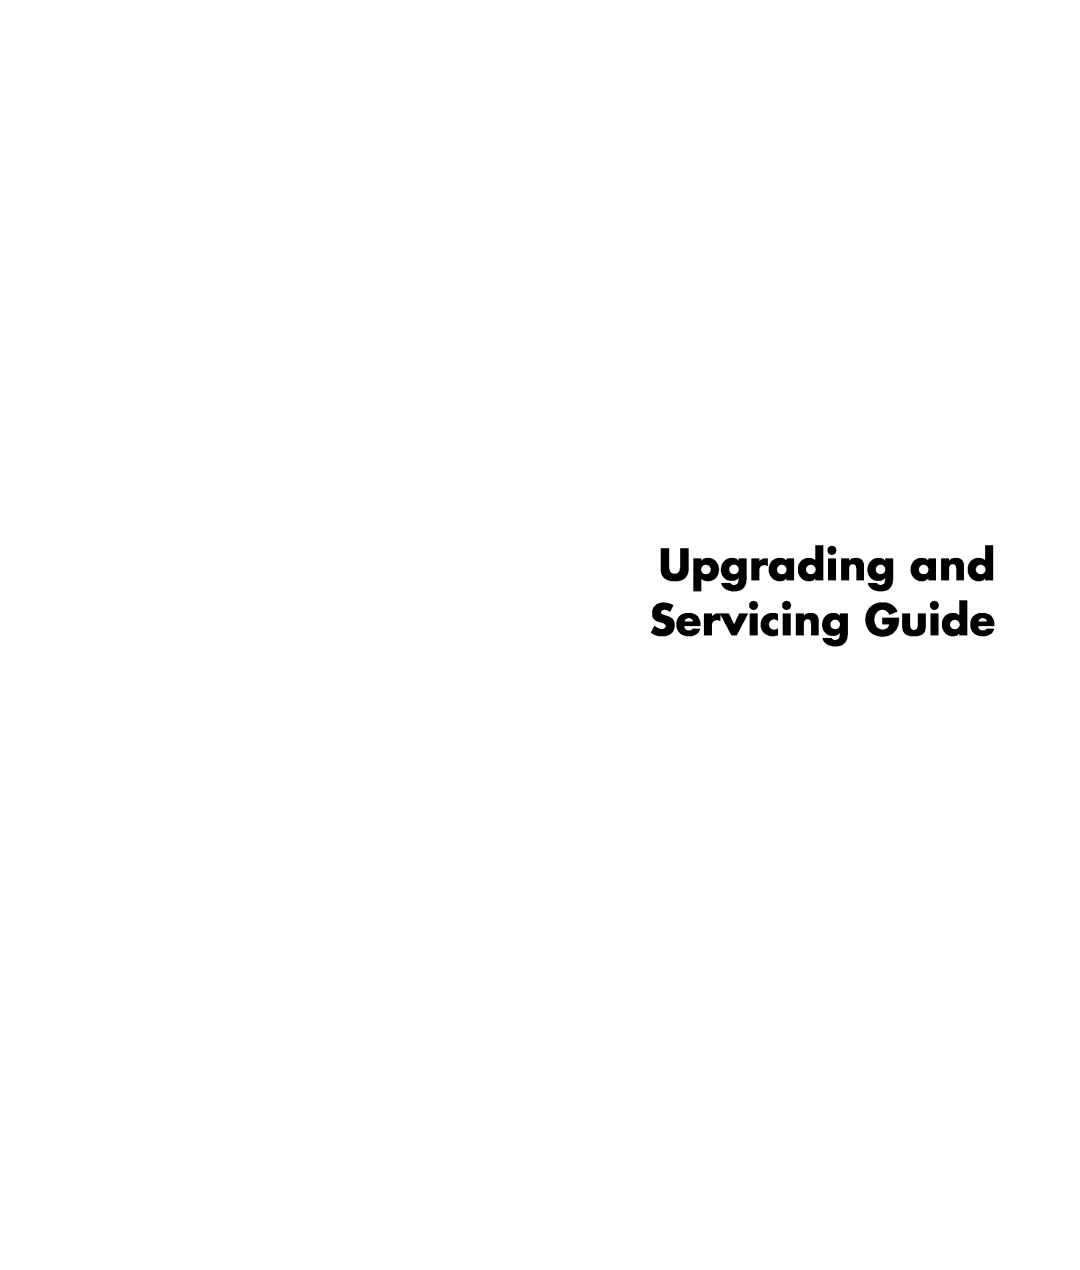 HP SR2172NX, SR2264WM, SR2170NX, SR2168HM, SR2163WM, SR2149UK, SR2175X, SR2150NX, SR2109UK manual Upgrading and Servicing Guide 